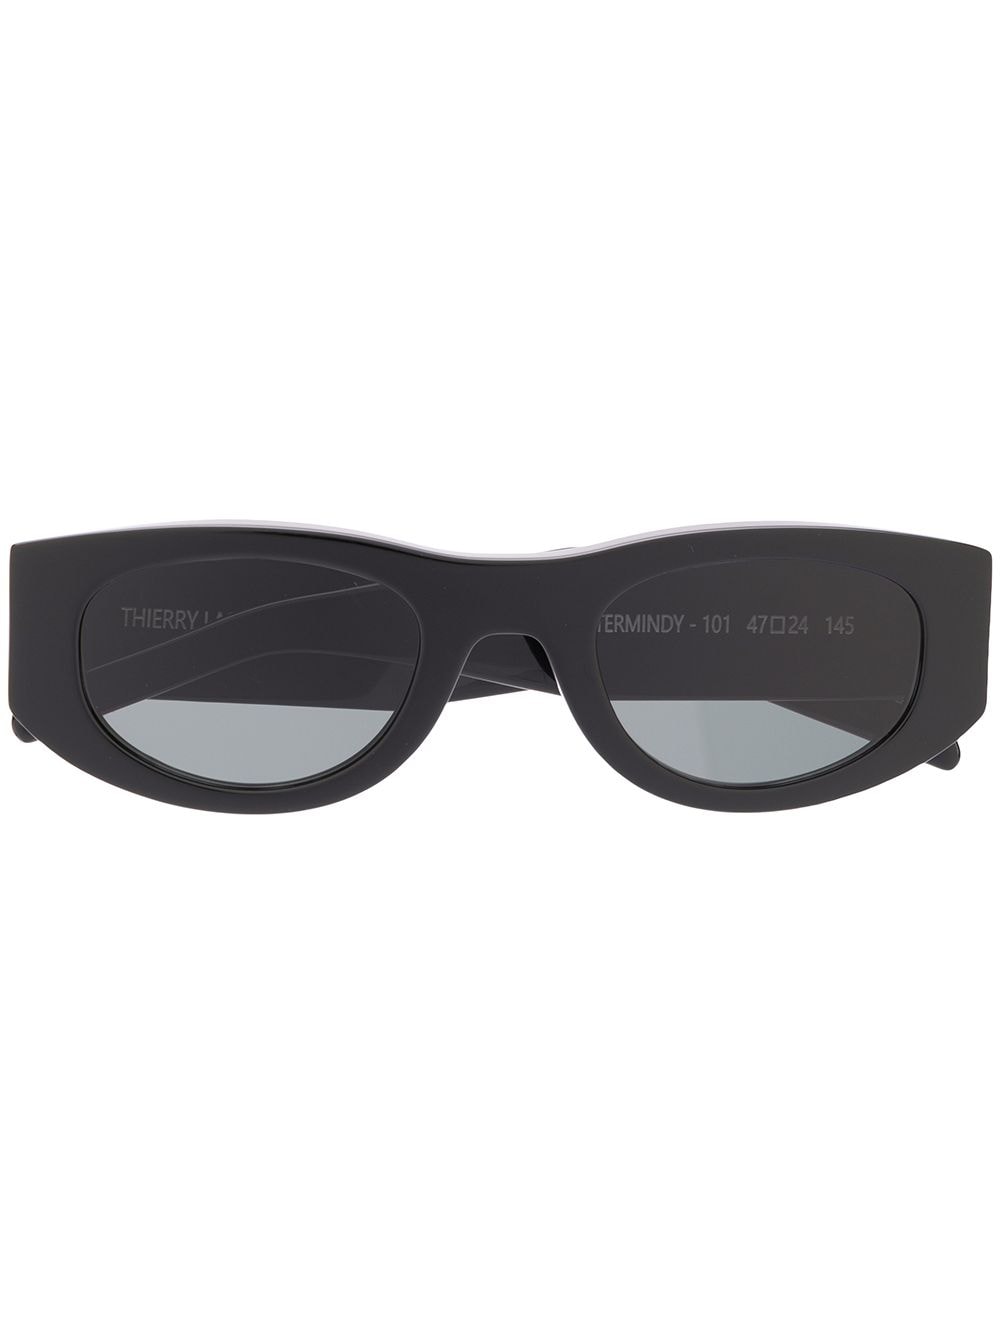 THIERRY LASRY MASTERMINDY OVAL-FRAME SUNGLASSES